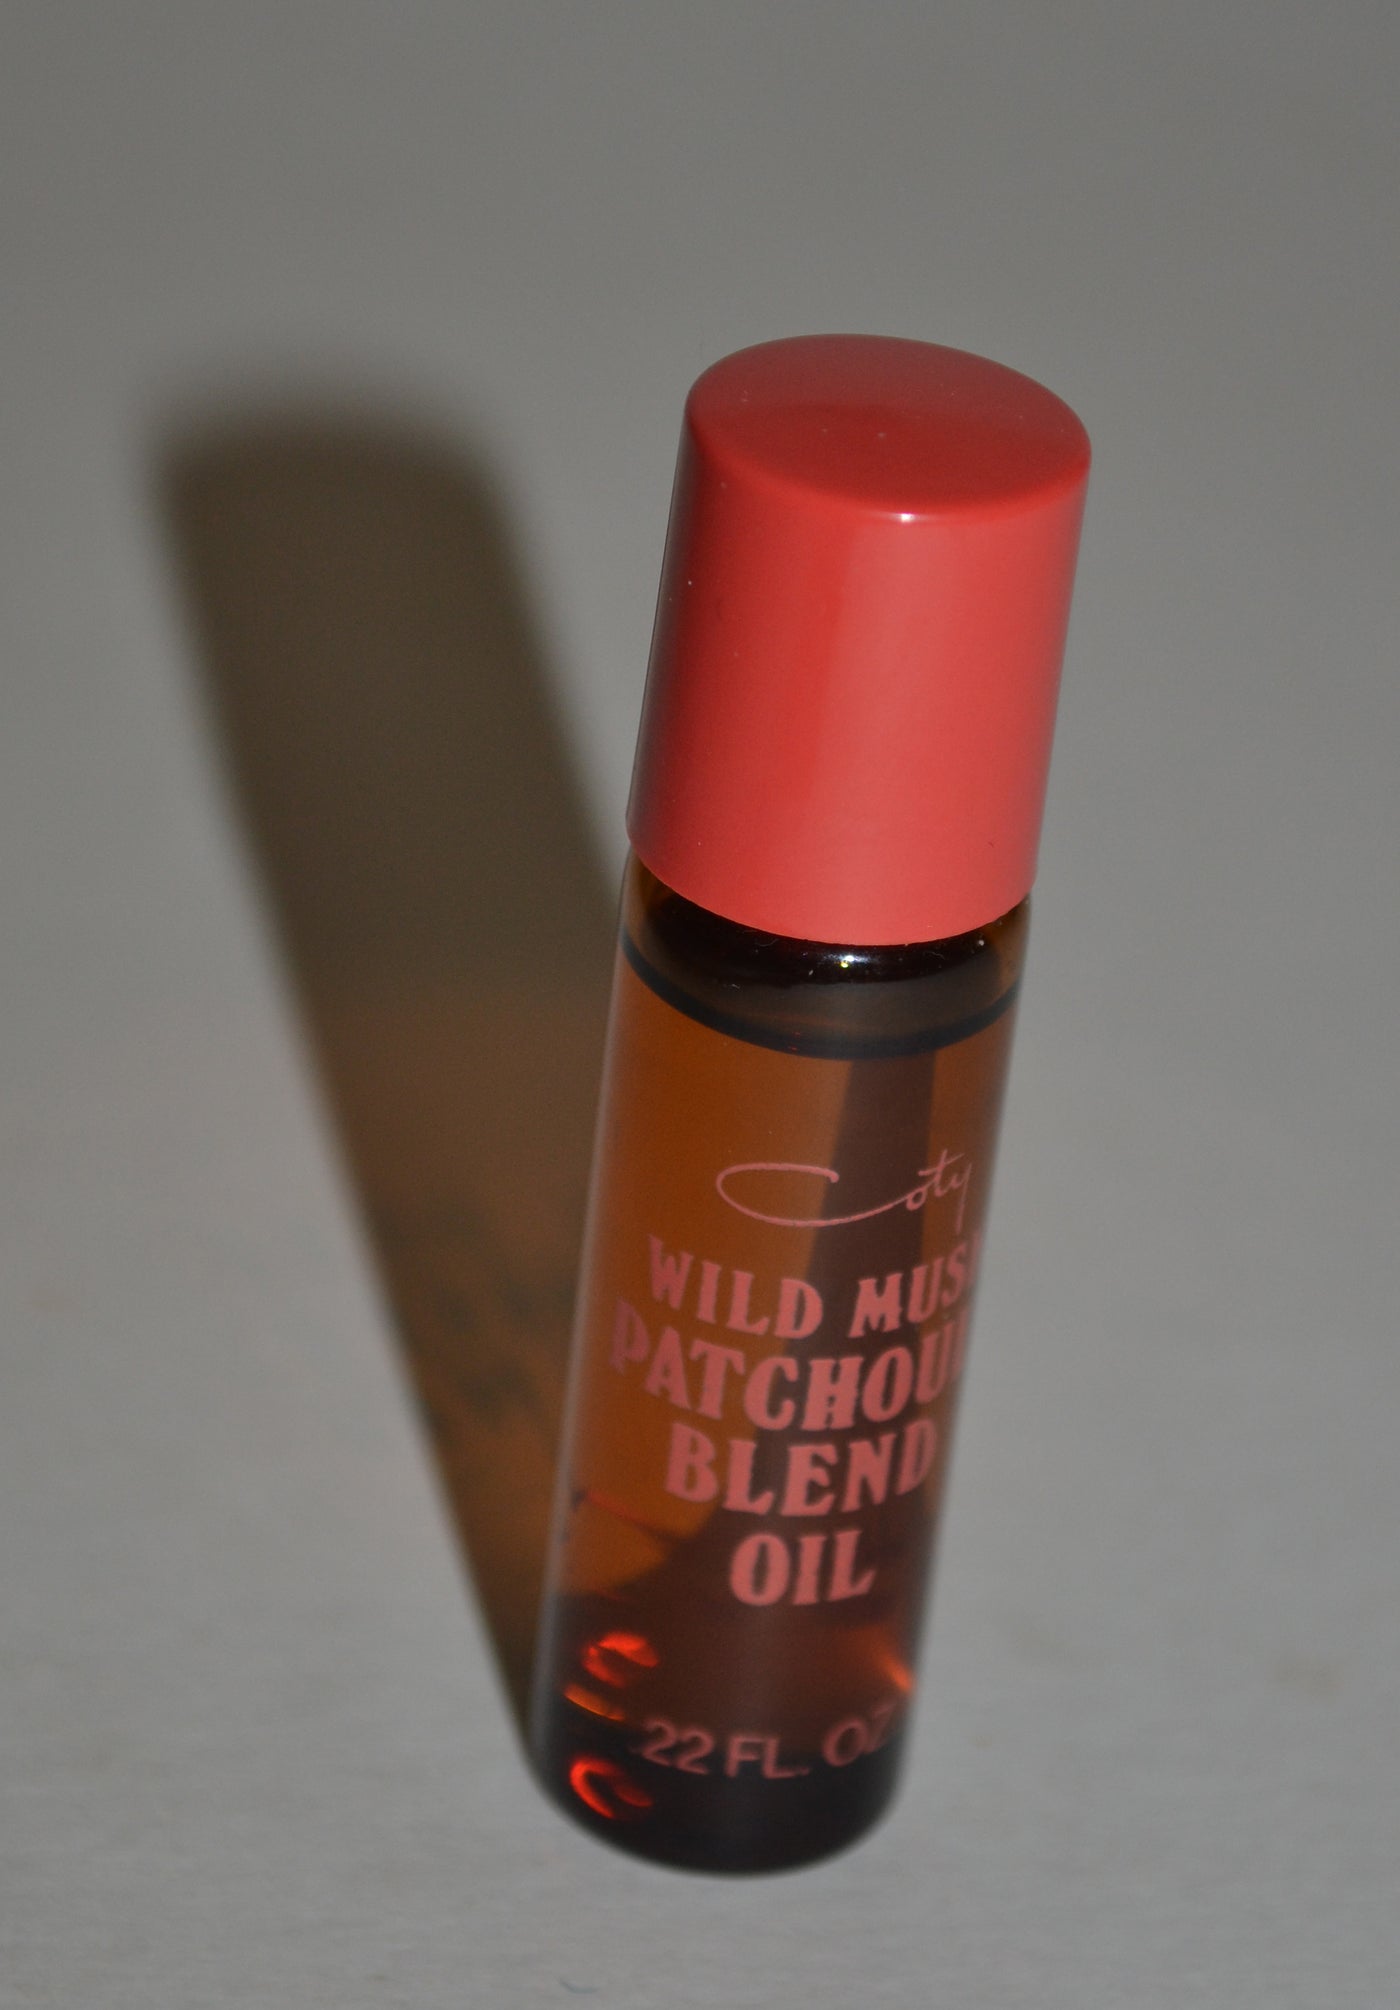 Wild Musk Patchouli Blend Oil By Coty